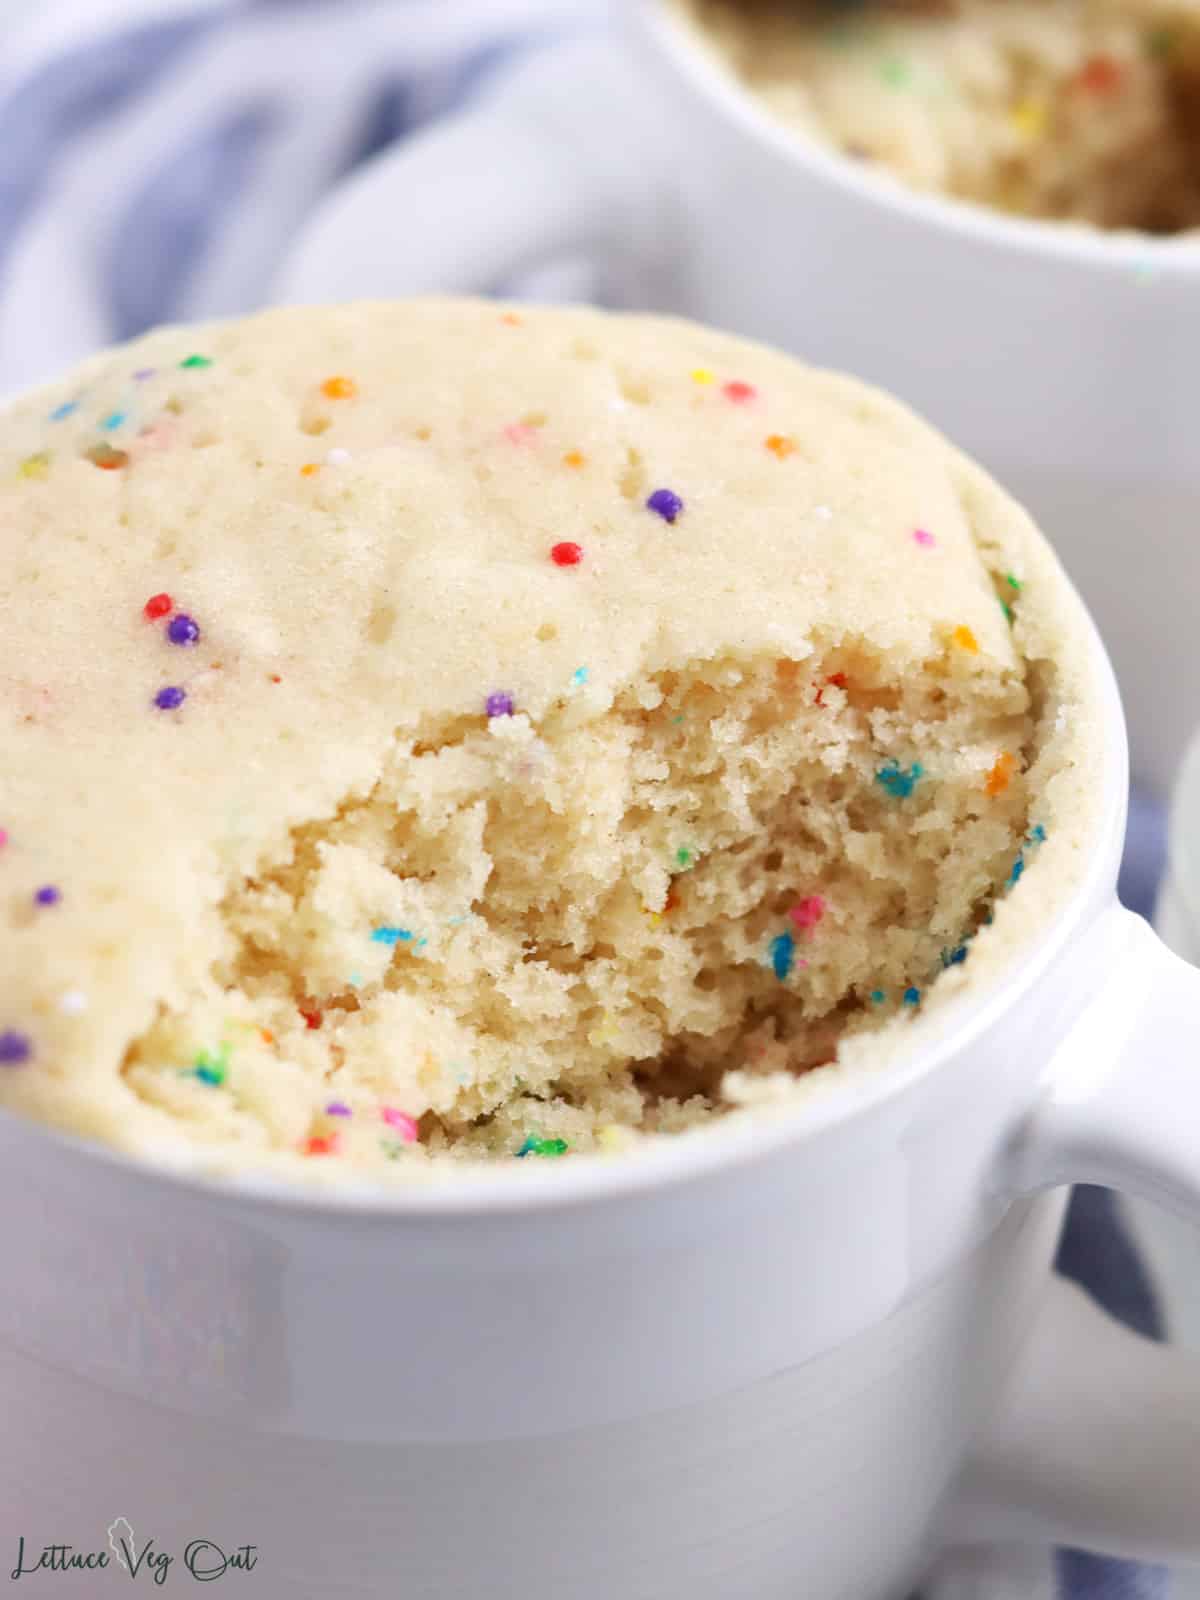 Close up of vanilla cake in a mug with a bite taken out to show inside texture.